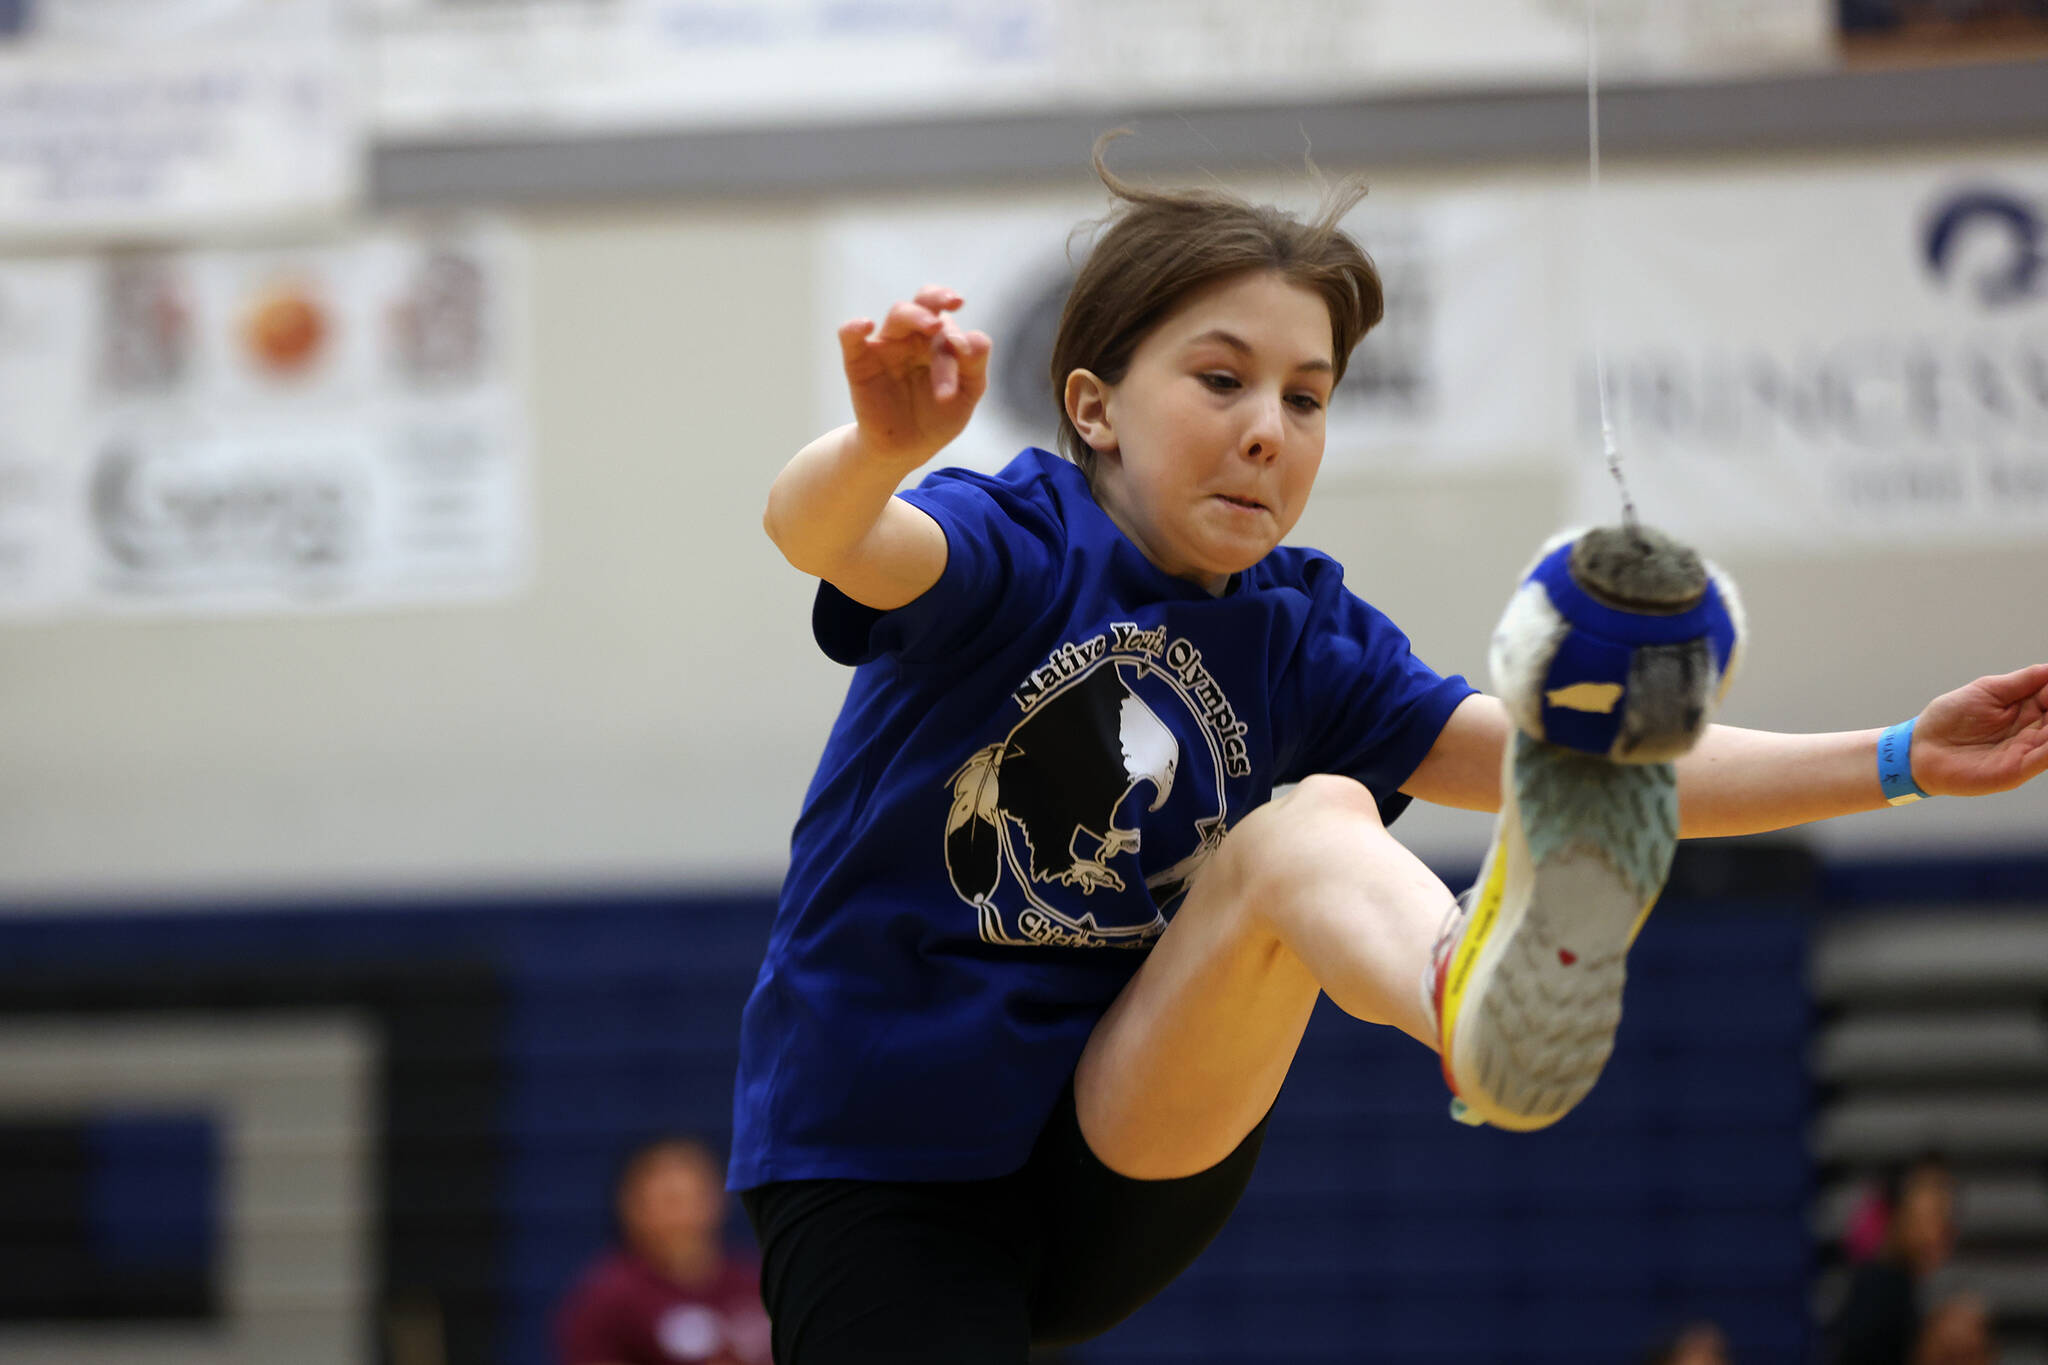 Maya Boger, 11, of Chickaloon connects with the ball during the one-foot high kick. The event was one of many during this year’s Traditional Games. (Ben Hohenstatt / Juneau Empire)